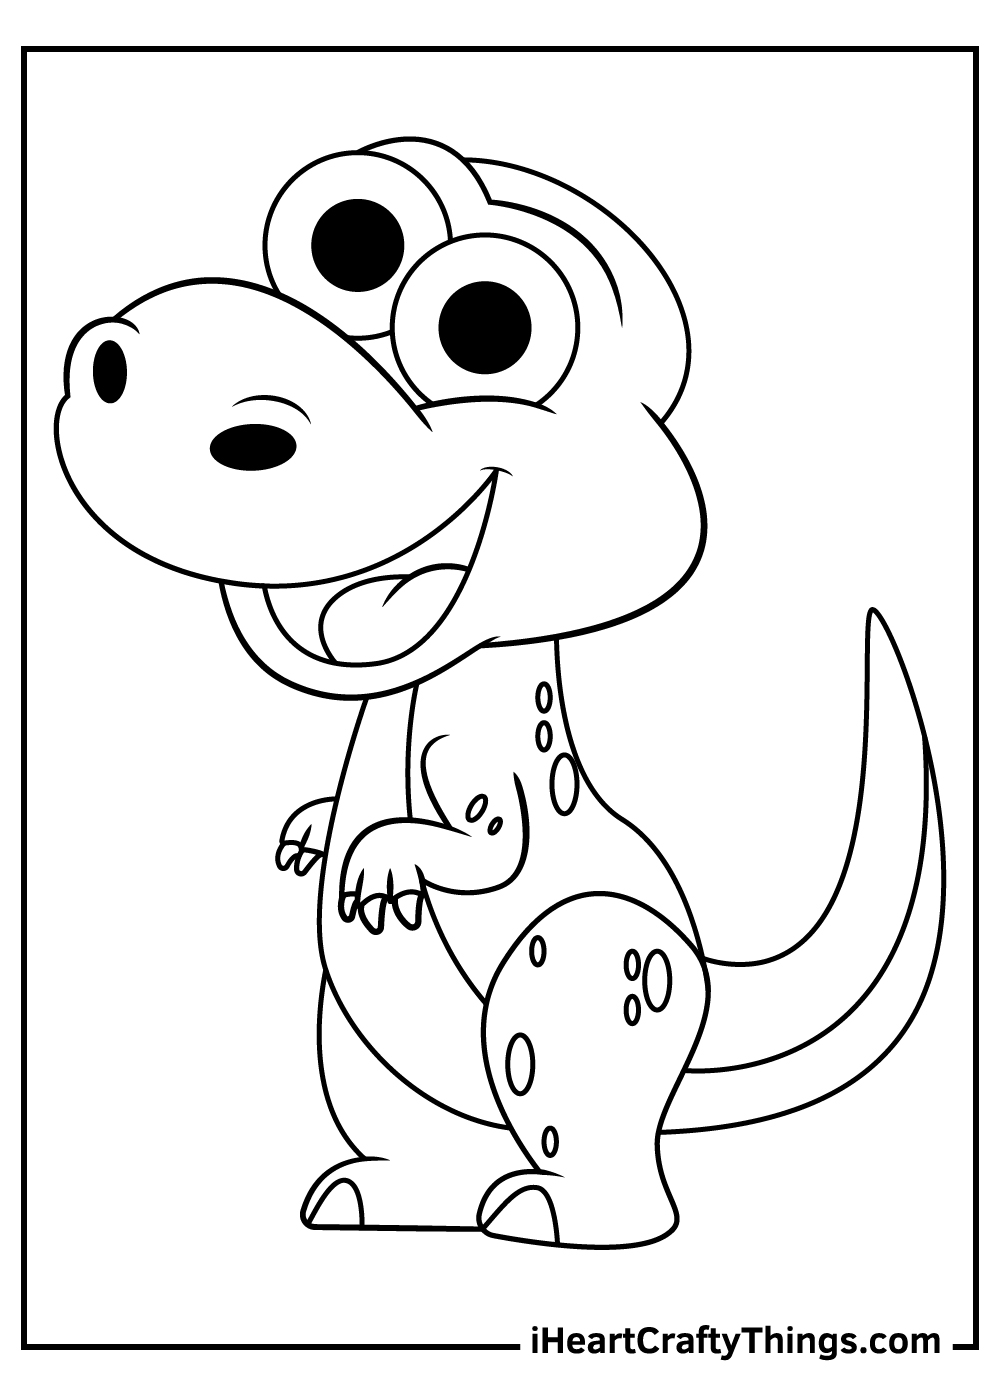 Cute Dinosaurs Coloring Pages free printable